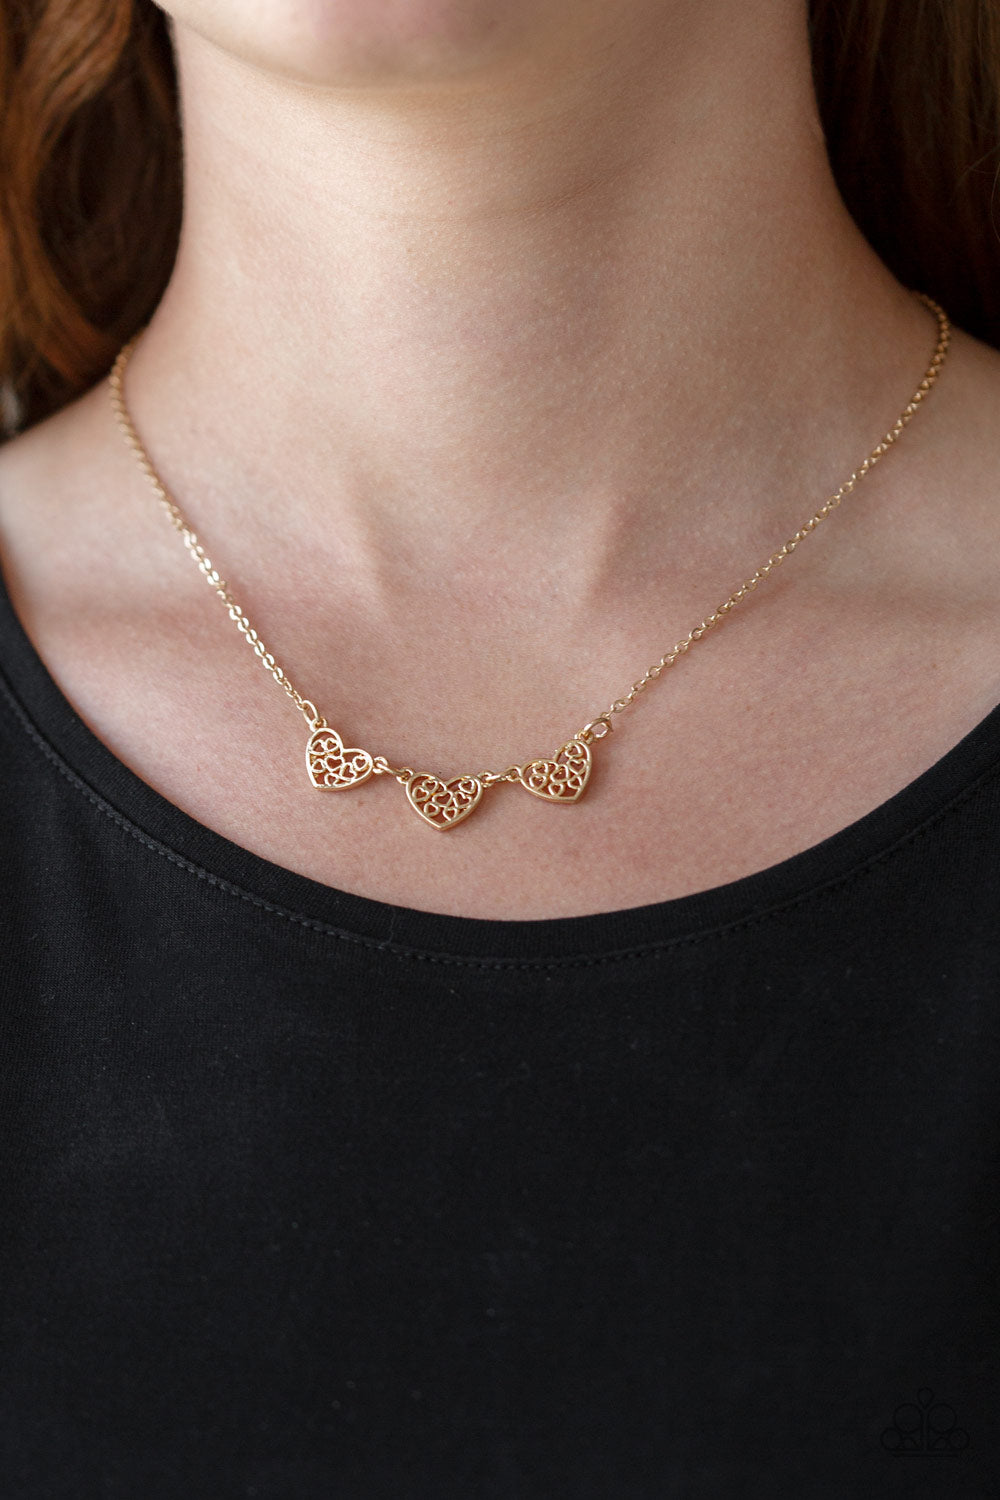 Another Love Story Gold Necklace